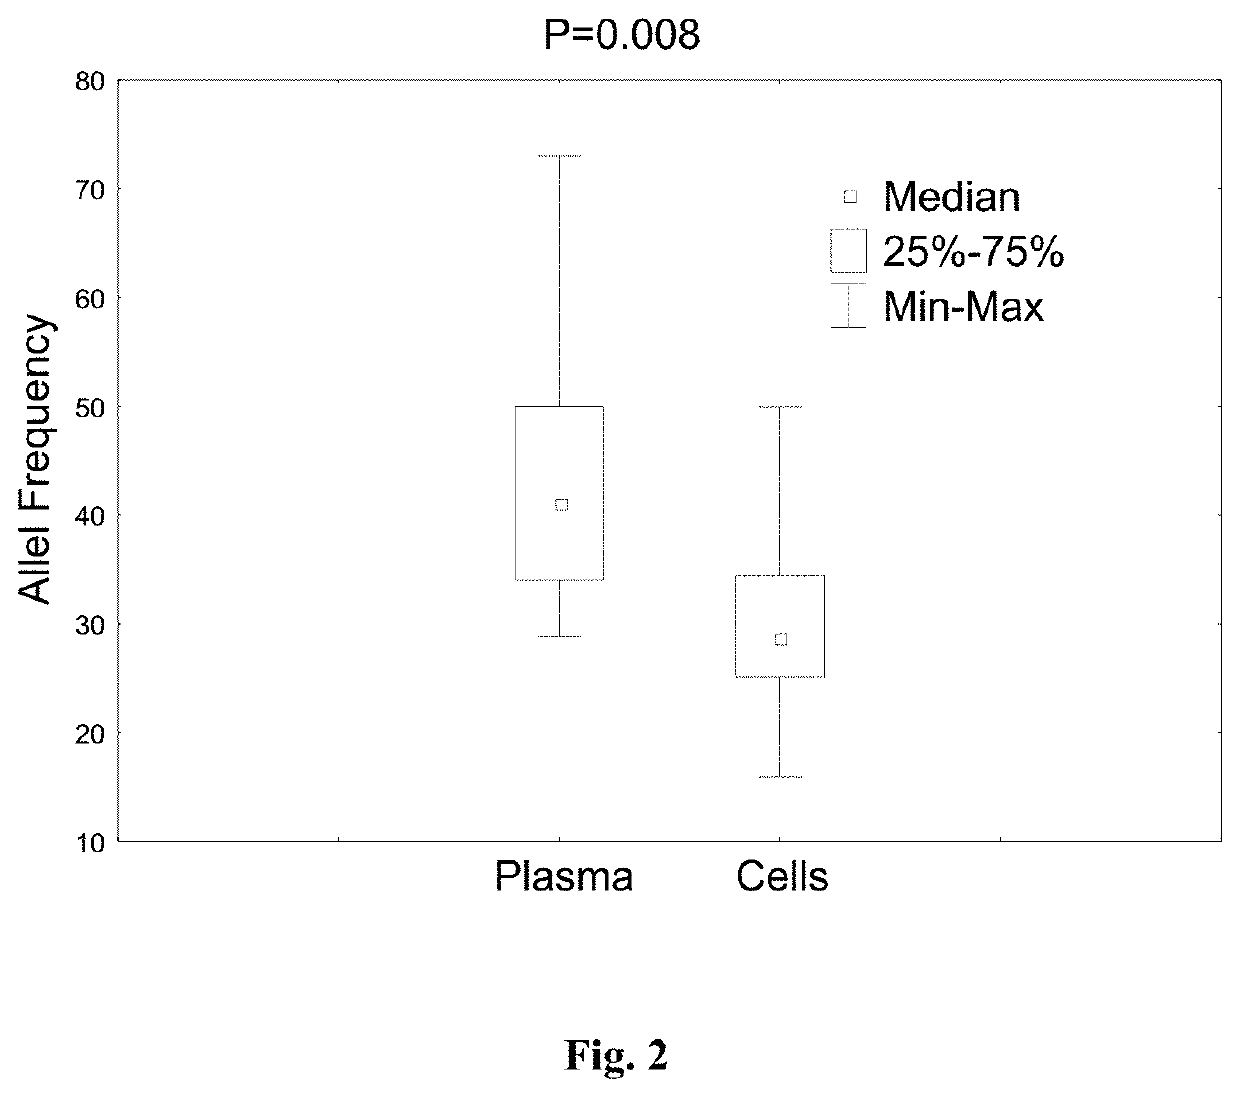 Deep sequecing of peripheral blood plasma DNA as a reliable test for confirming the diagnosis of myelodysplastic syndrome